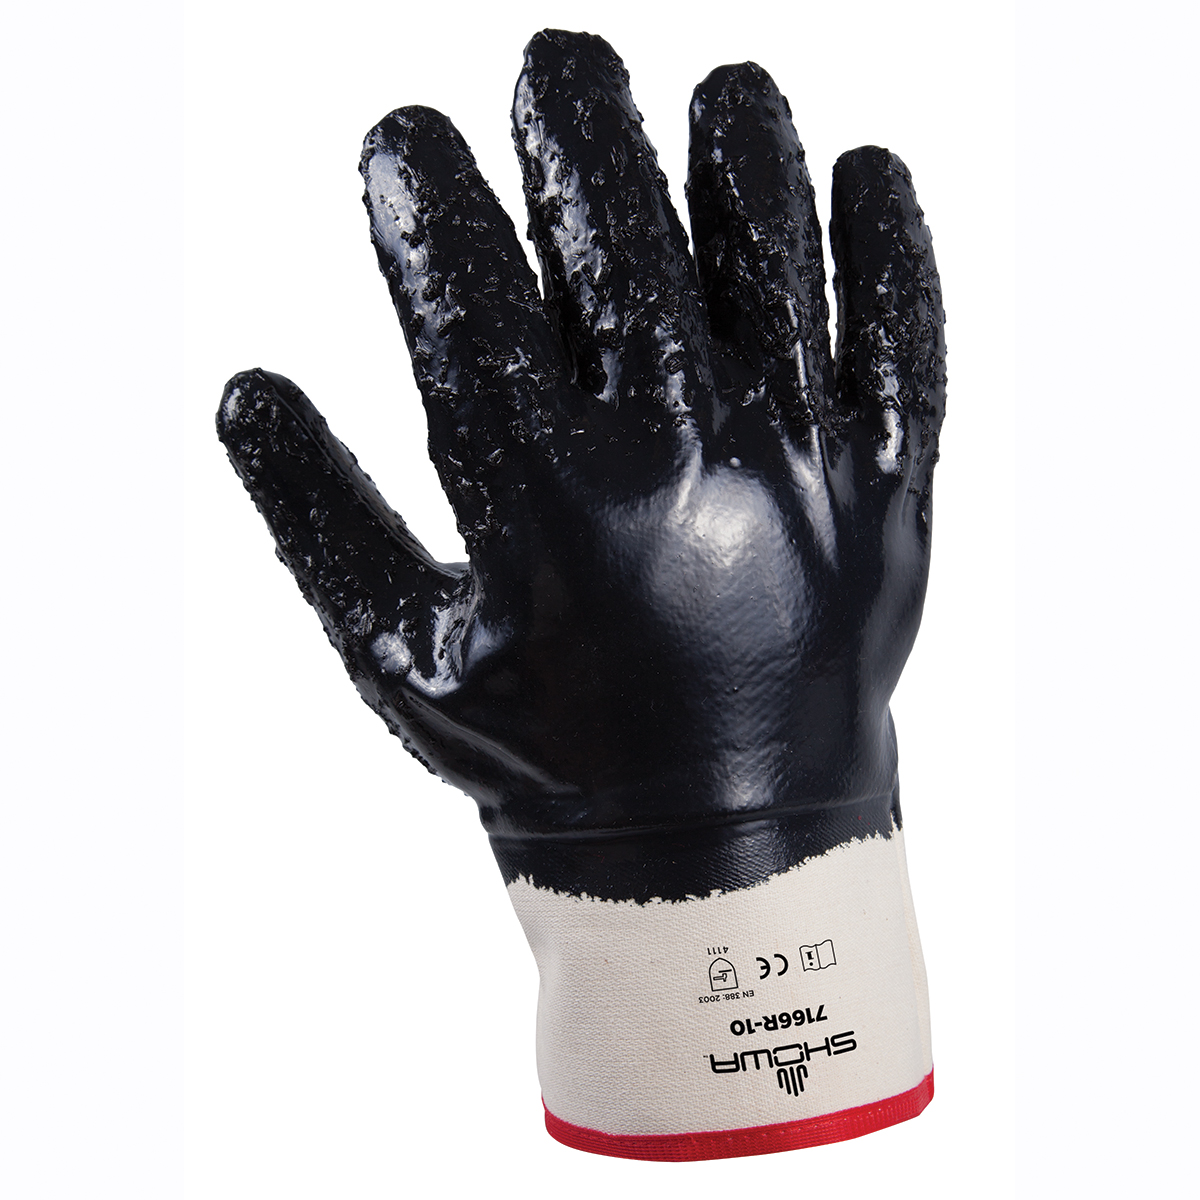 General purpose nitrile coated, navy, fully coated rubberized safety cuff, rough finish, large